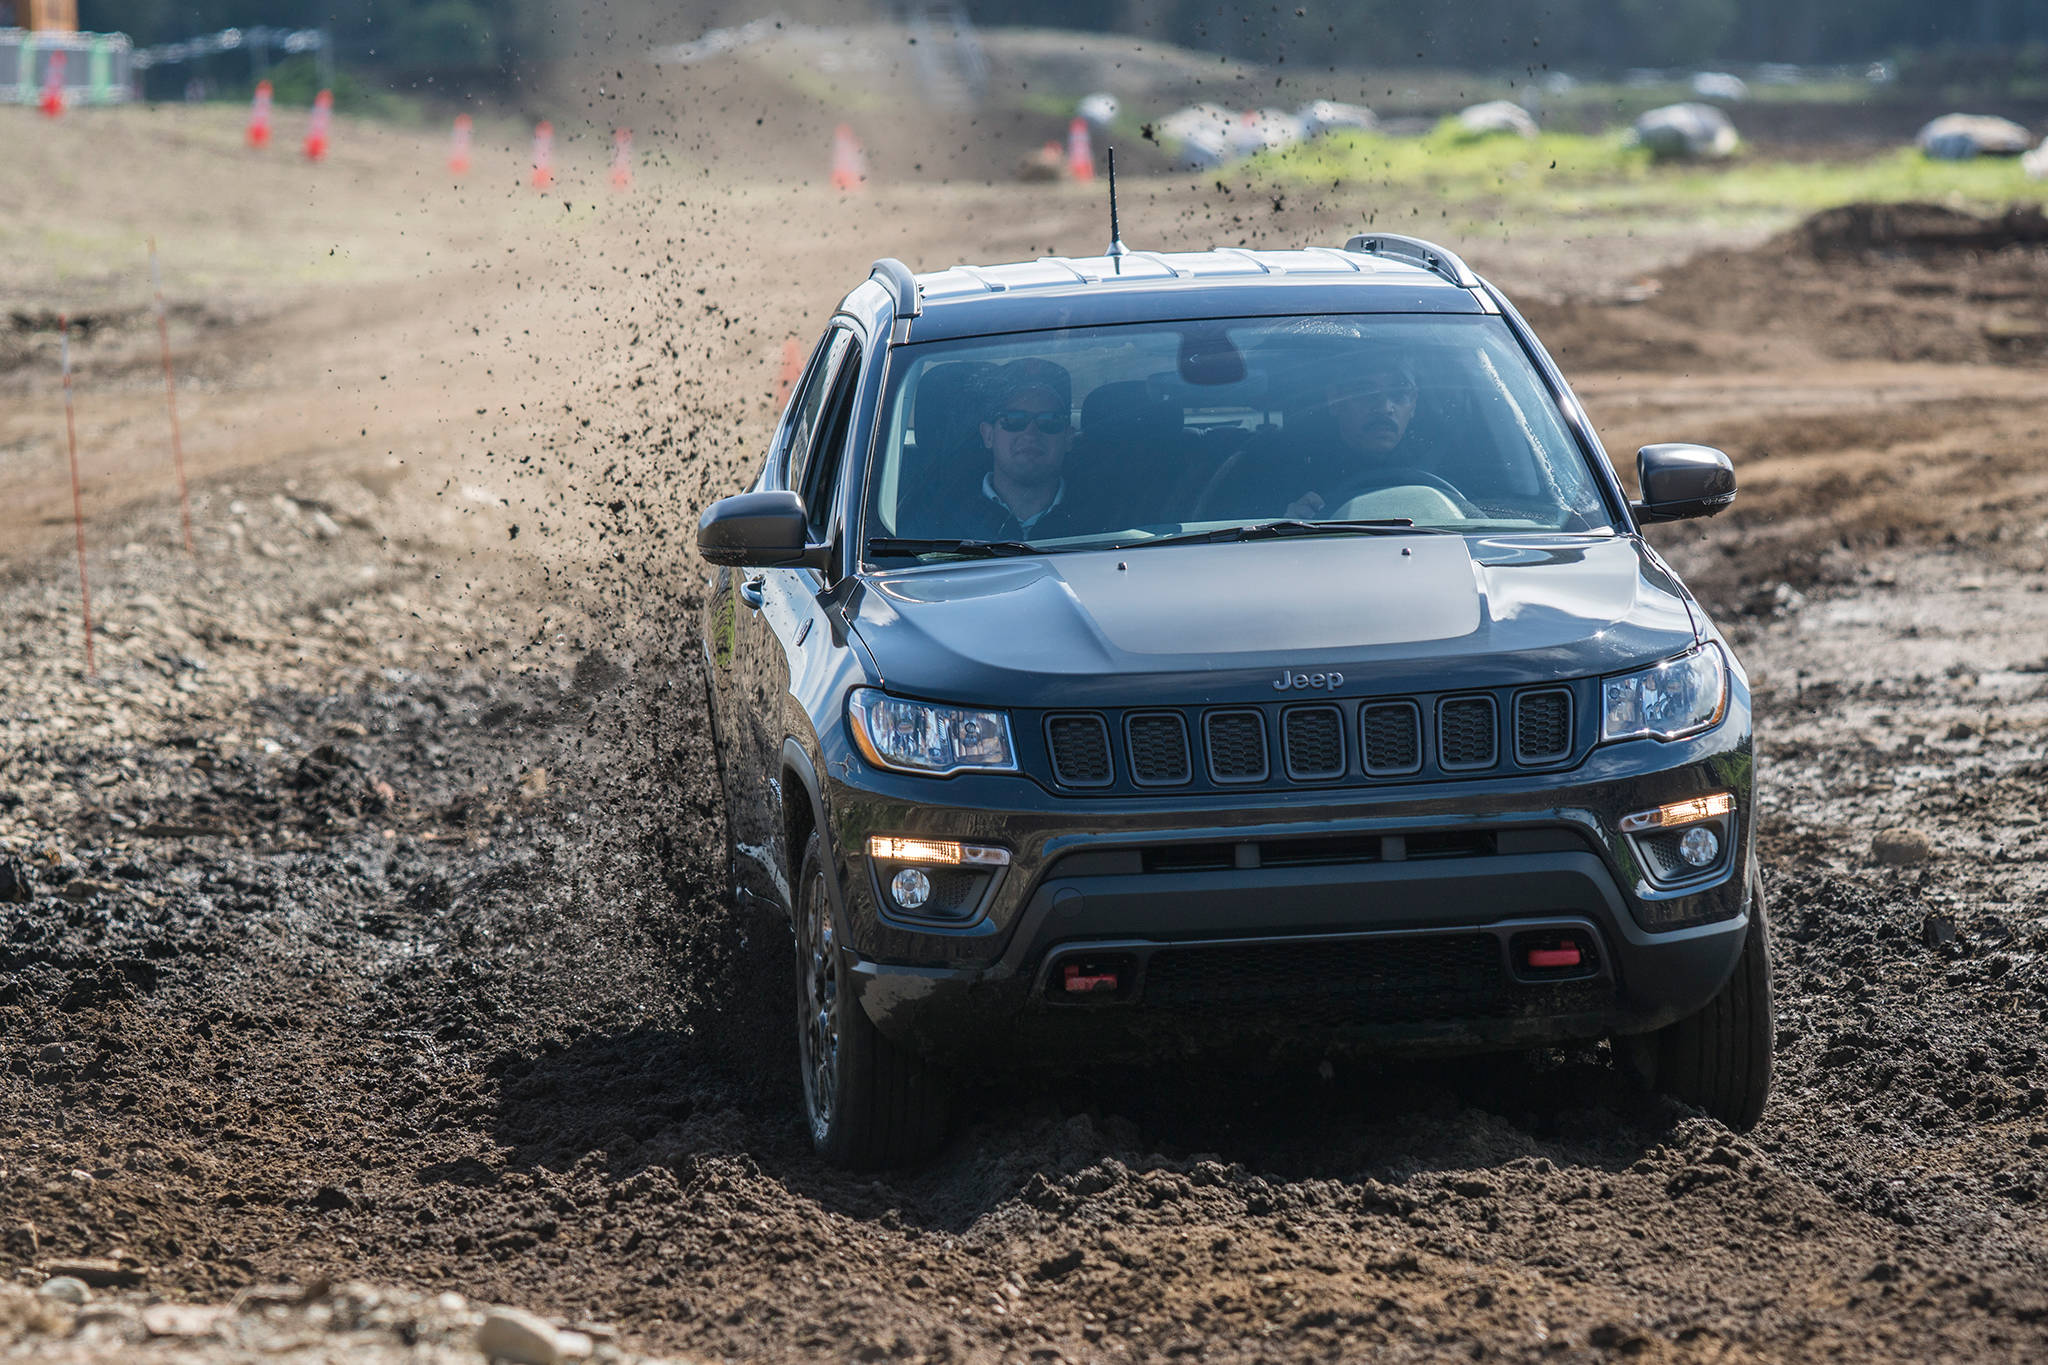 The Jeep Compass Trailhawk chews through the terrain at Mudfest, an off-road competition held in Washington. It was voted the top Compact Utility Vehicle by the Northwest Automotive Press Association, called the NWAPA.